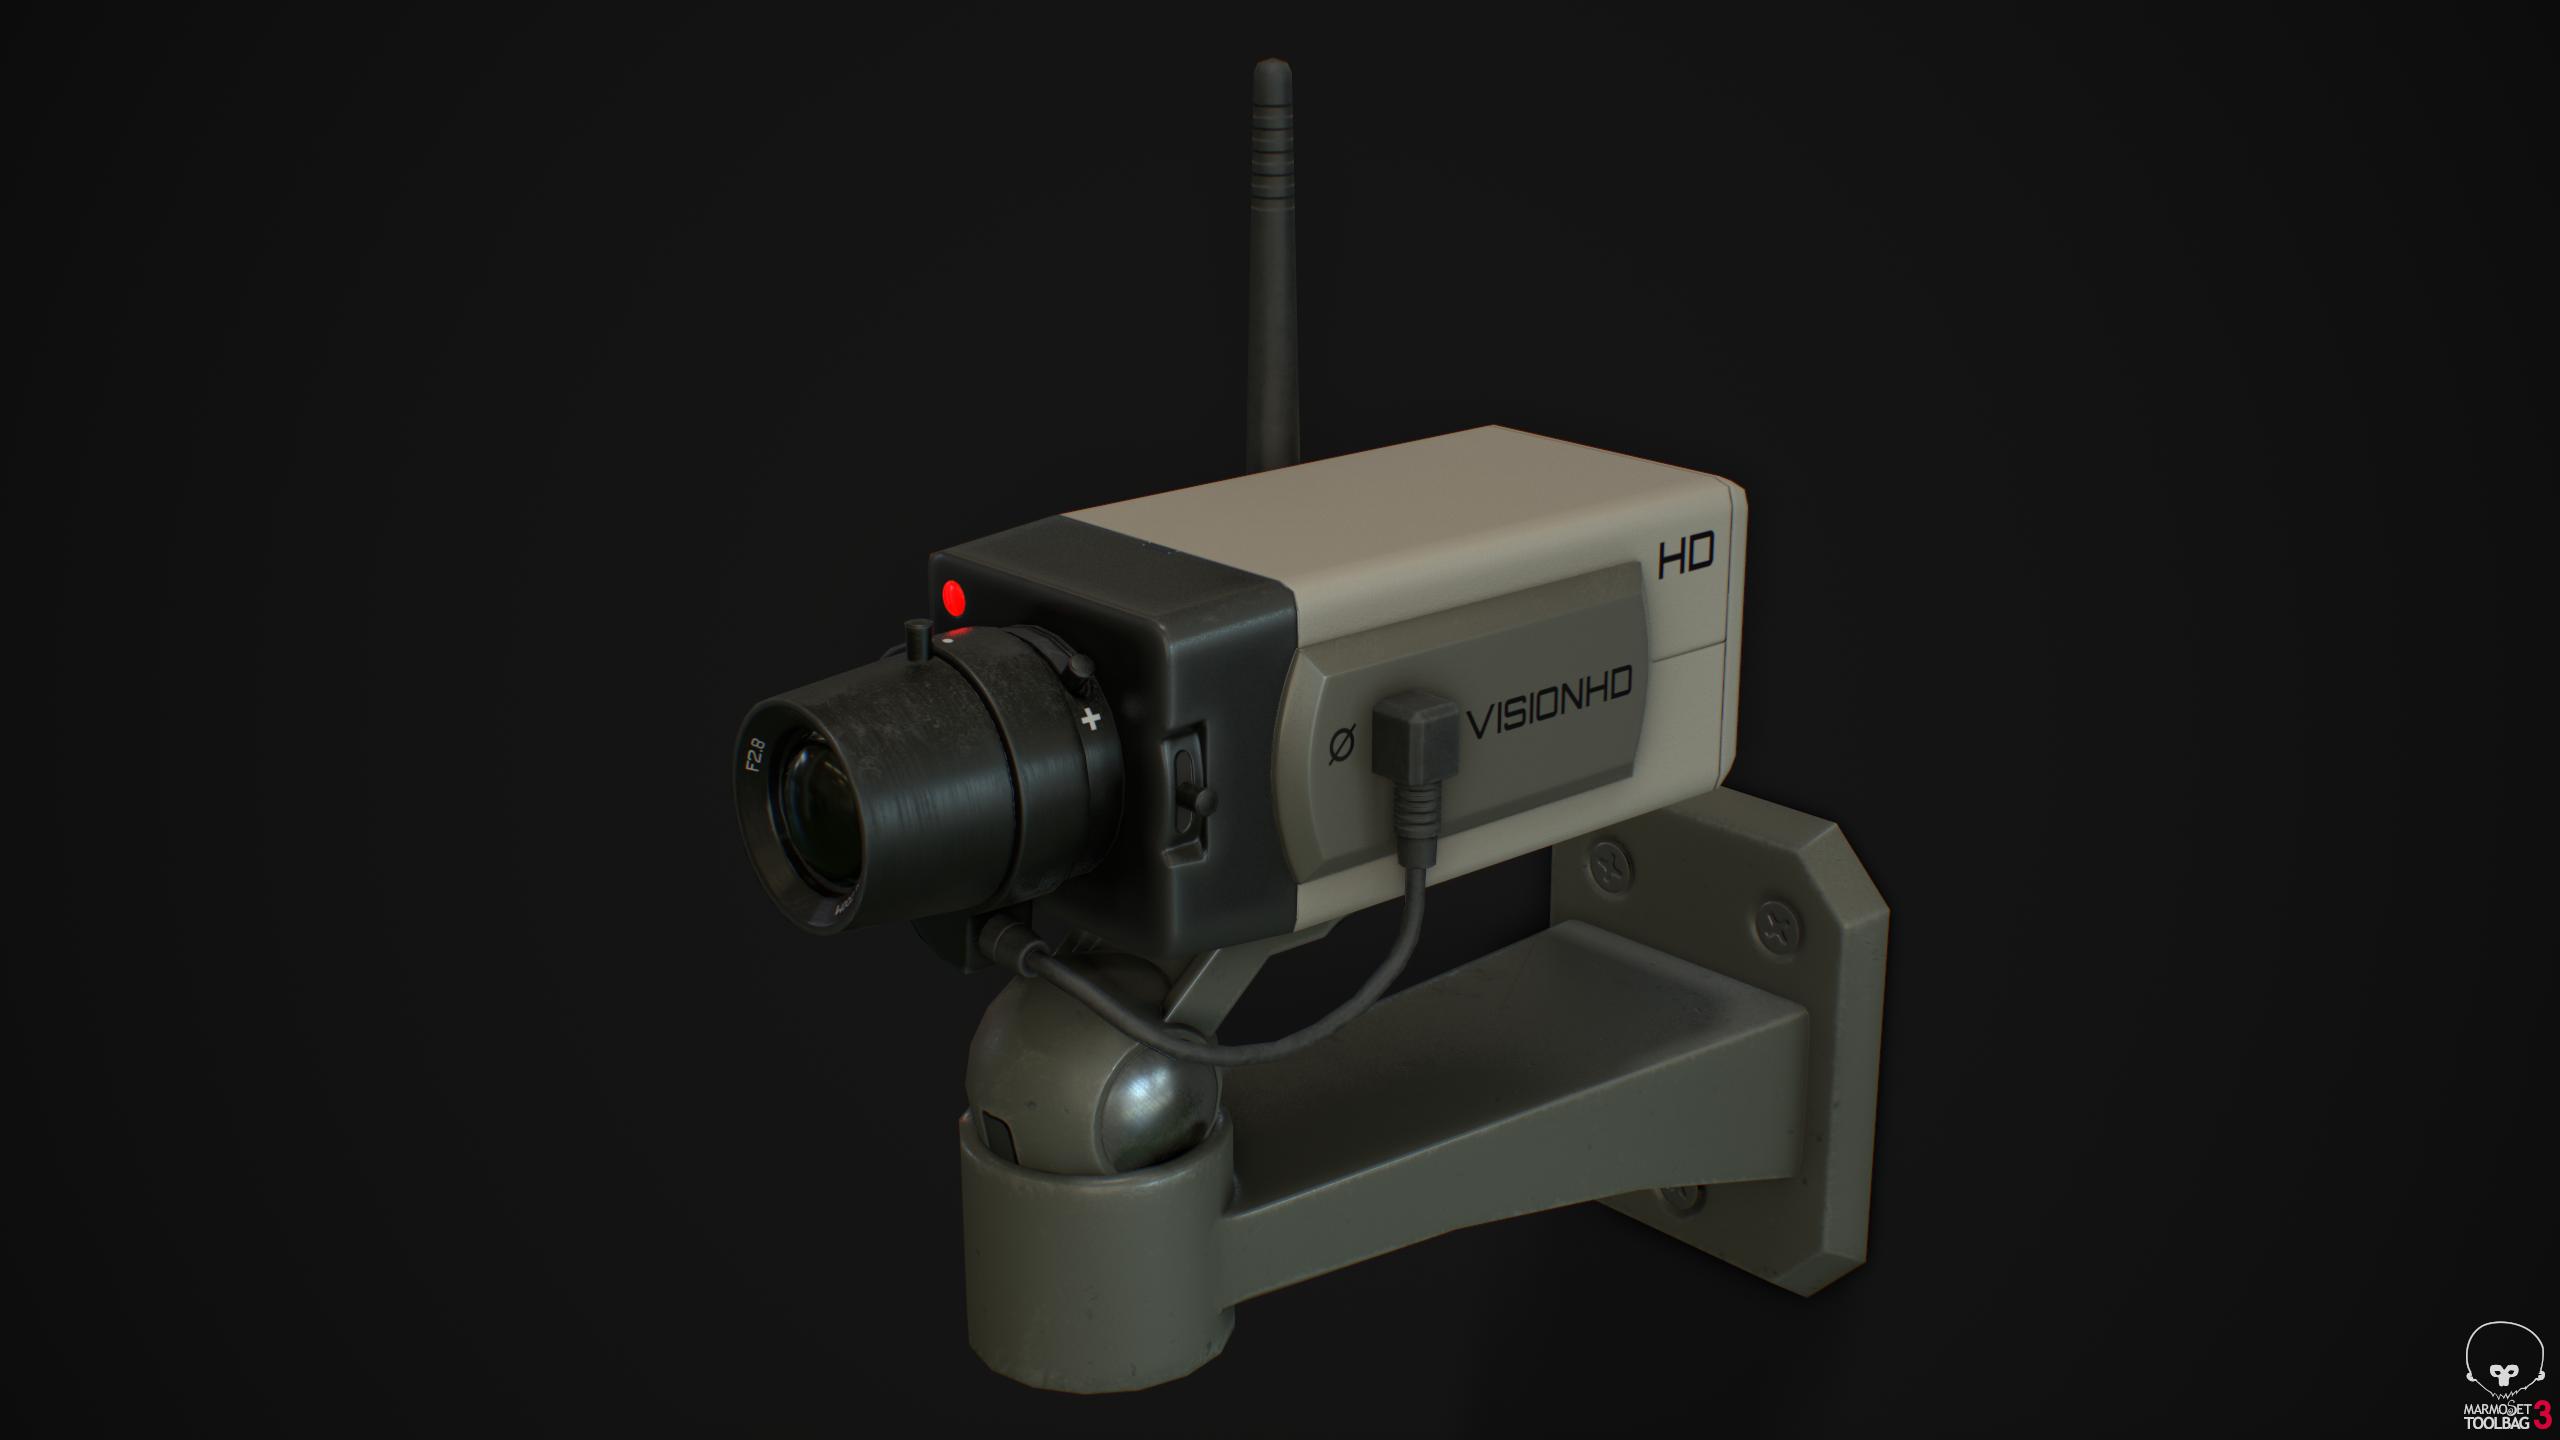 Render of a small security camera